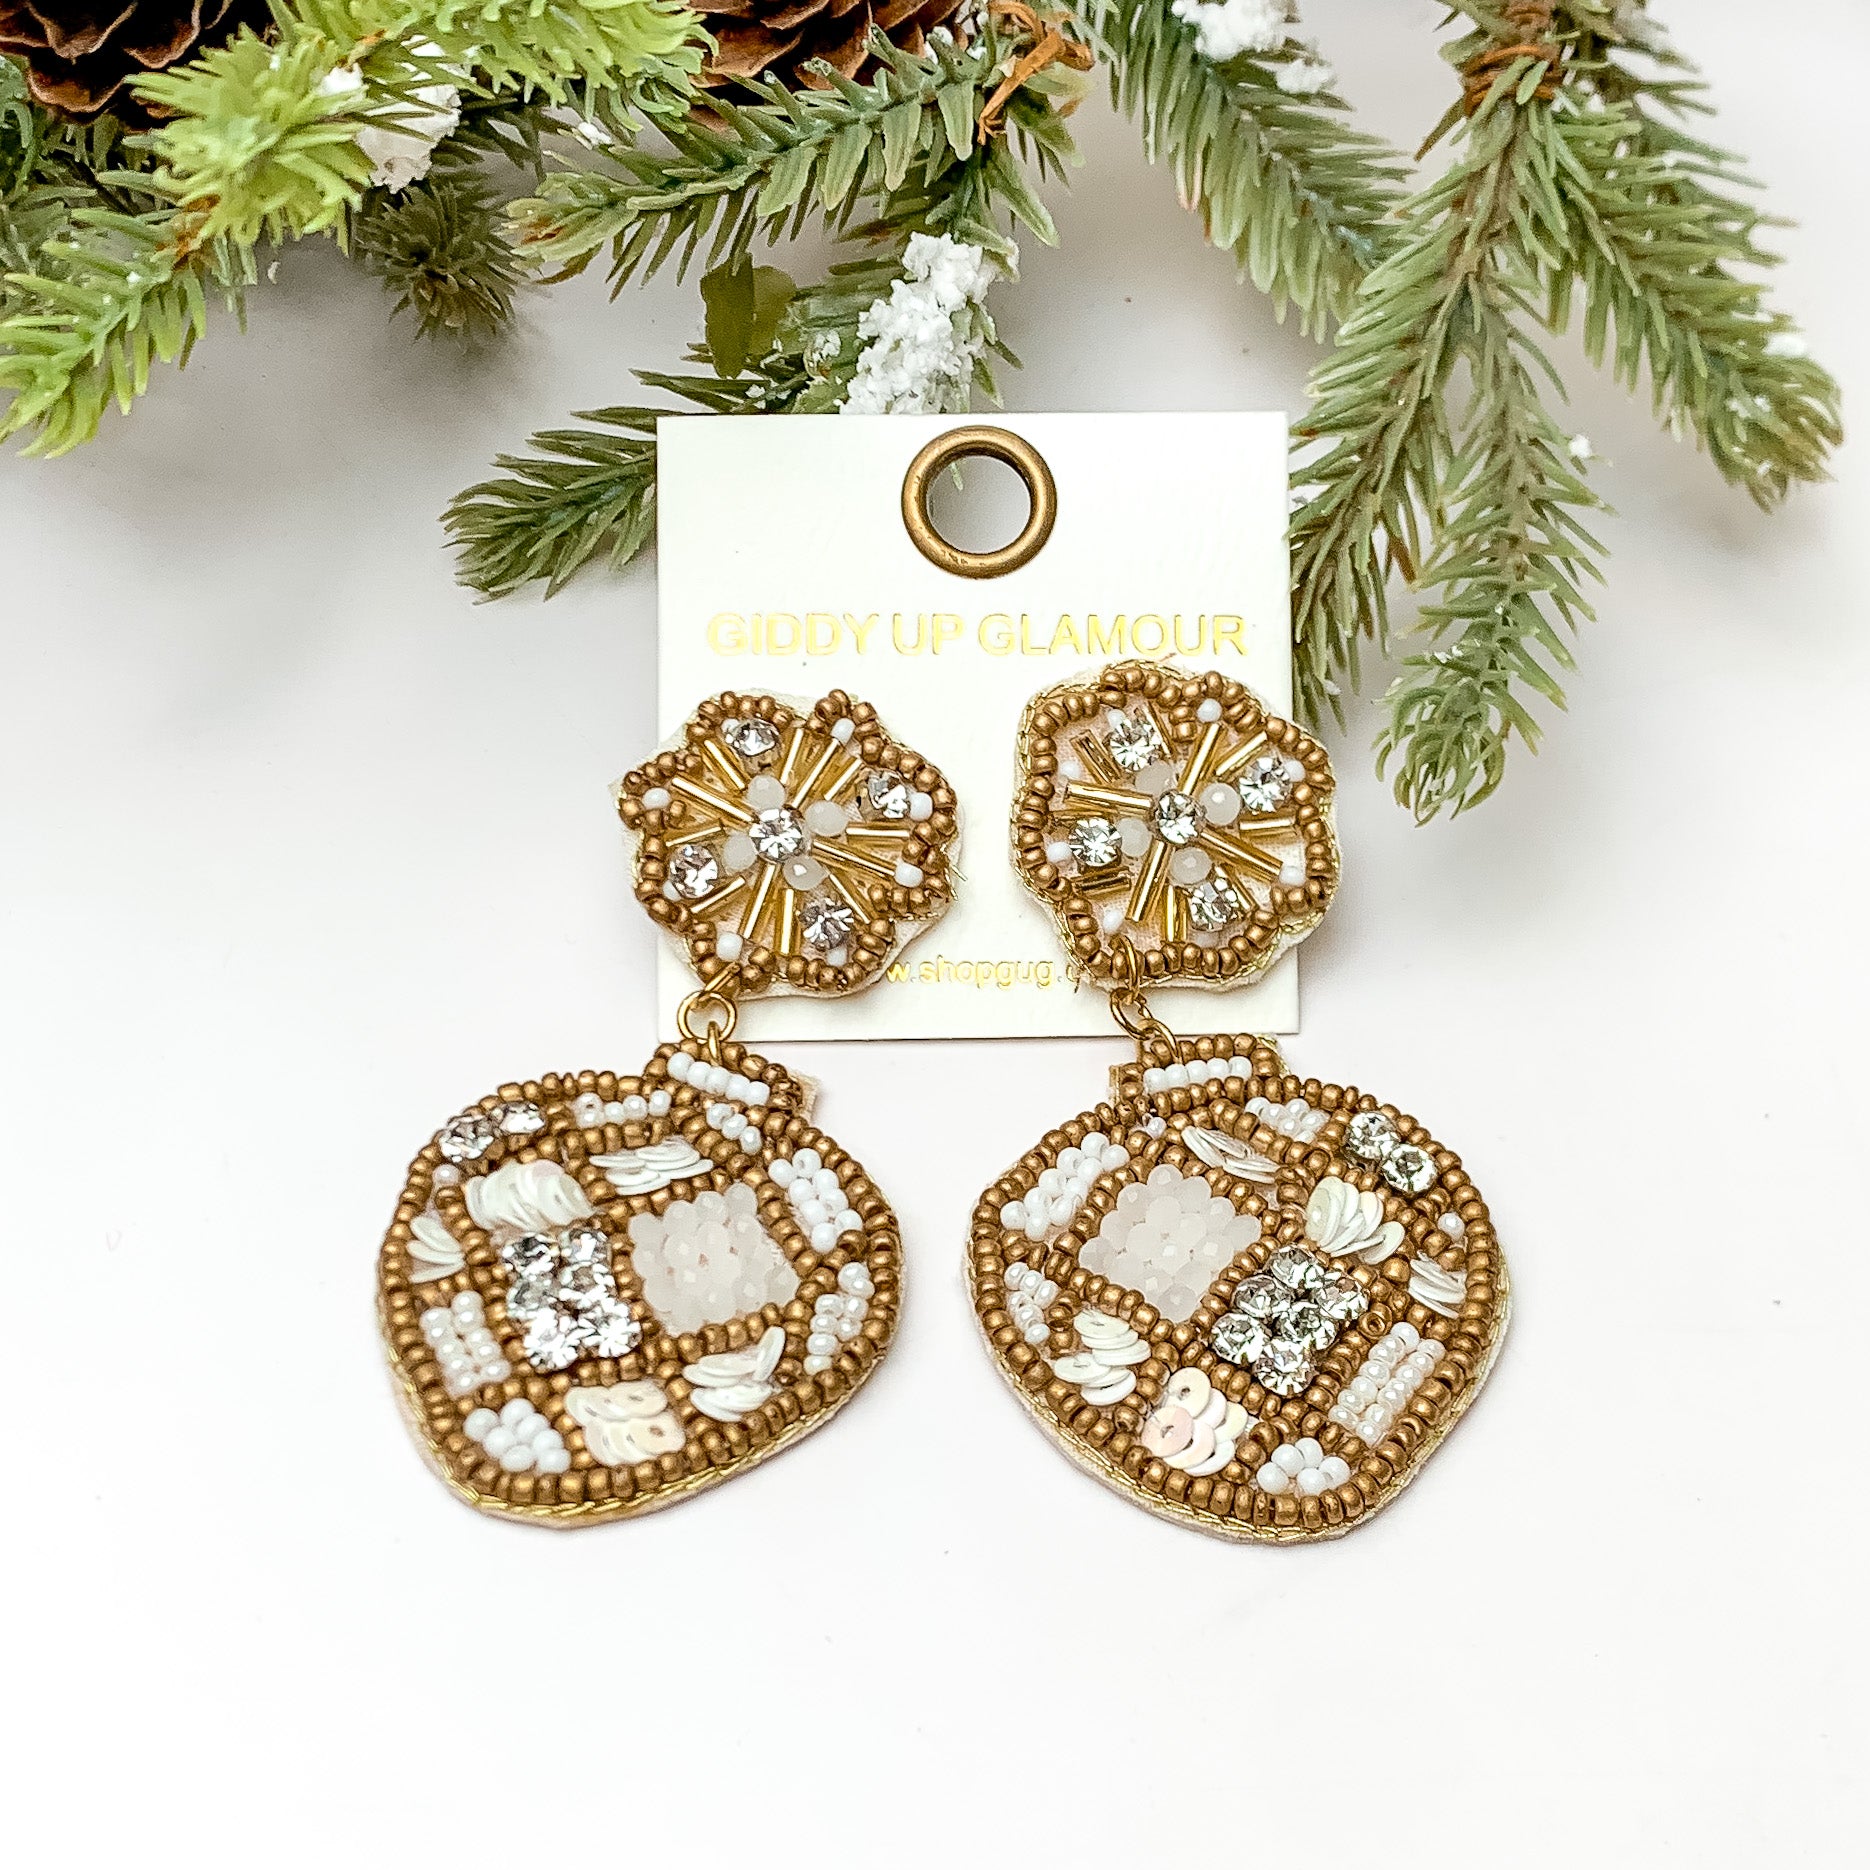 Ivory and gold beaded ornament shaped earrings. These earrings are pictured on a white background with pine trees at the top of the picture. 